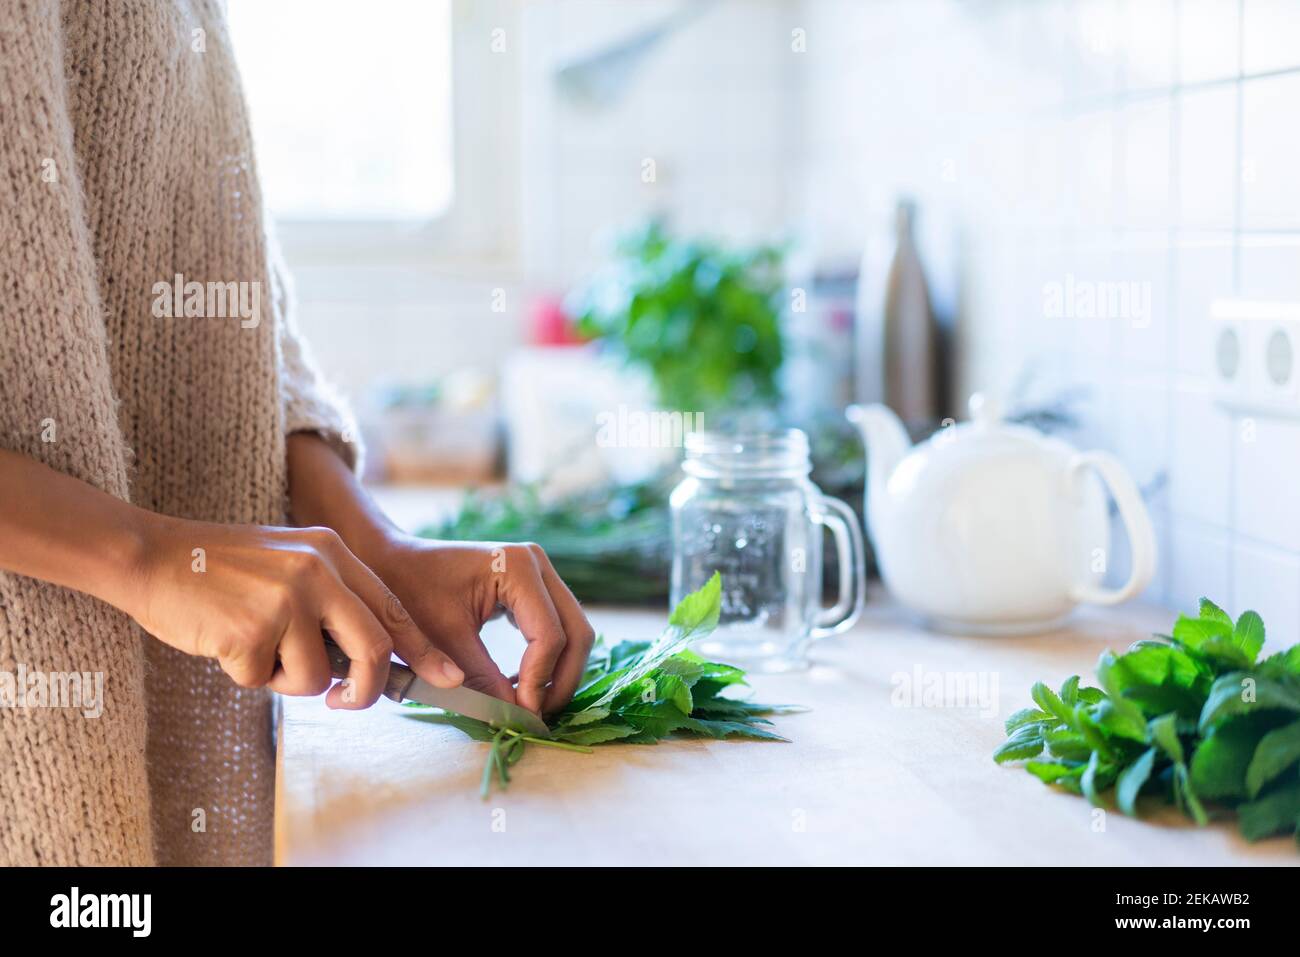 Woman's hand cutting herbal leavers to prepare tea in kitchen Stock Photo